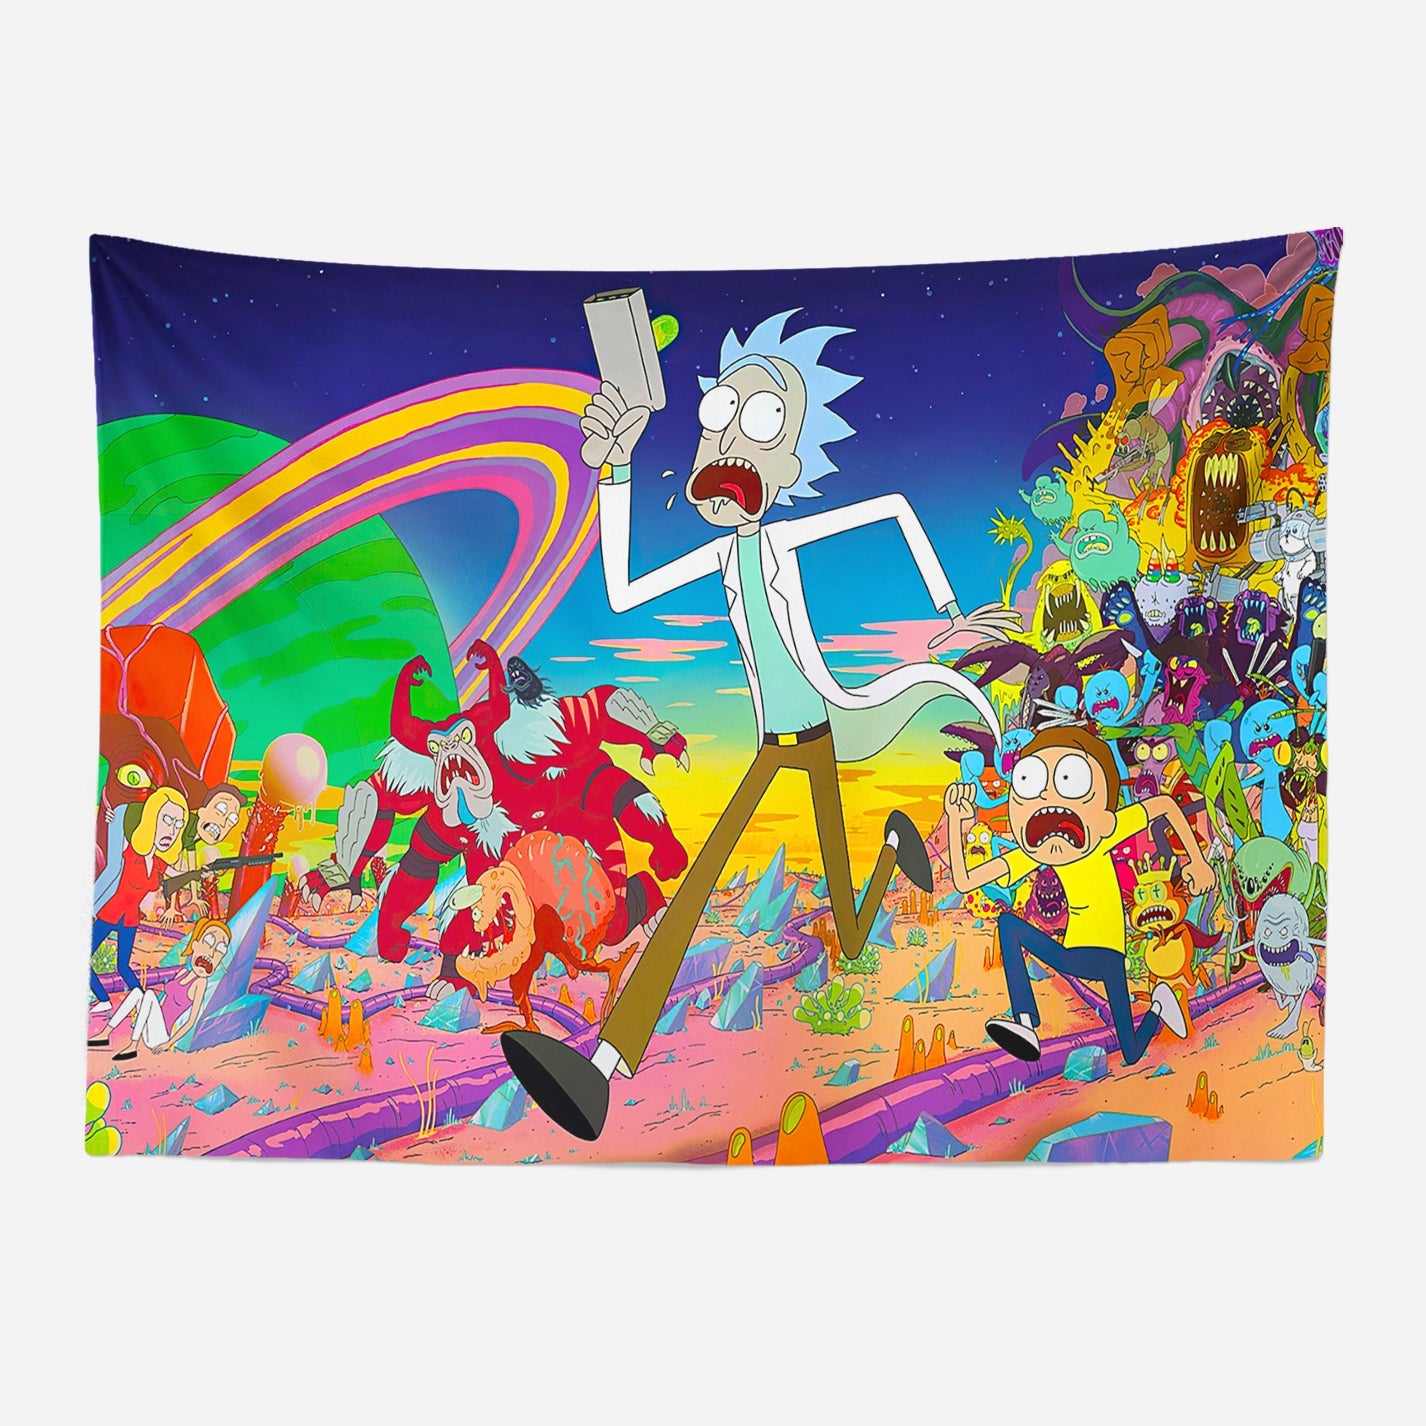 Rick & Morty Funny Anime Wall Art Tapestry